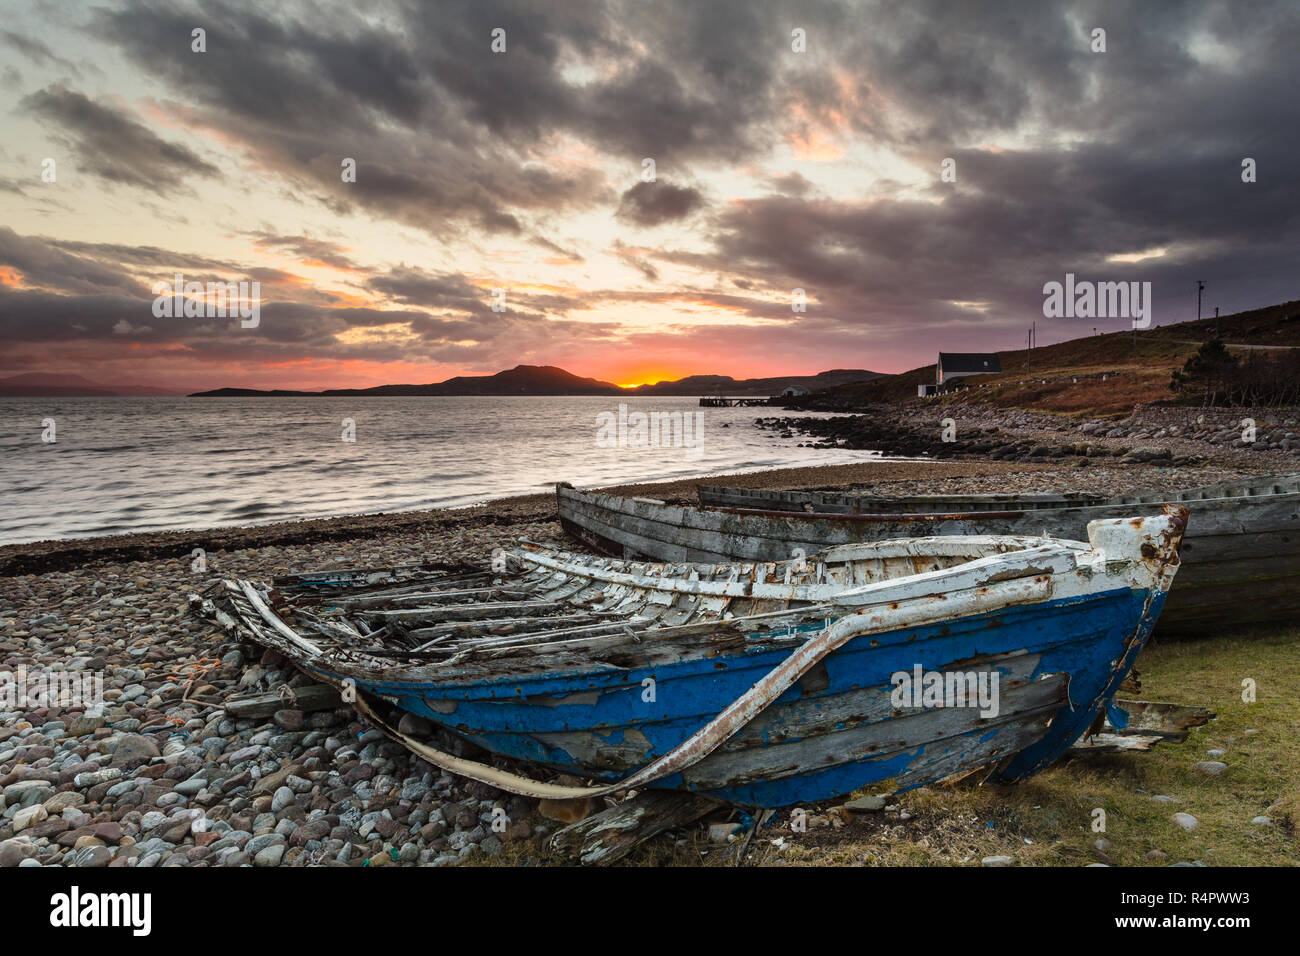 Ruined salmon cobles on the beach at Polbain, Coigach, North West Highlands of Scotland. Stock Photo